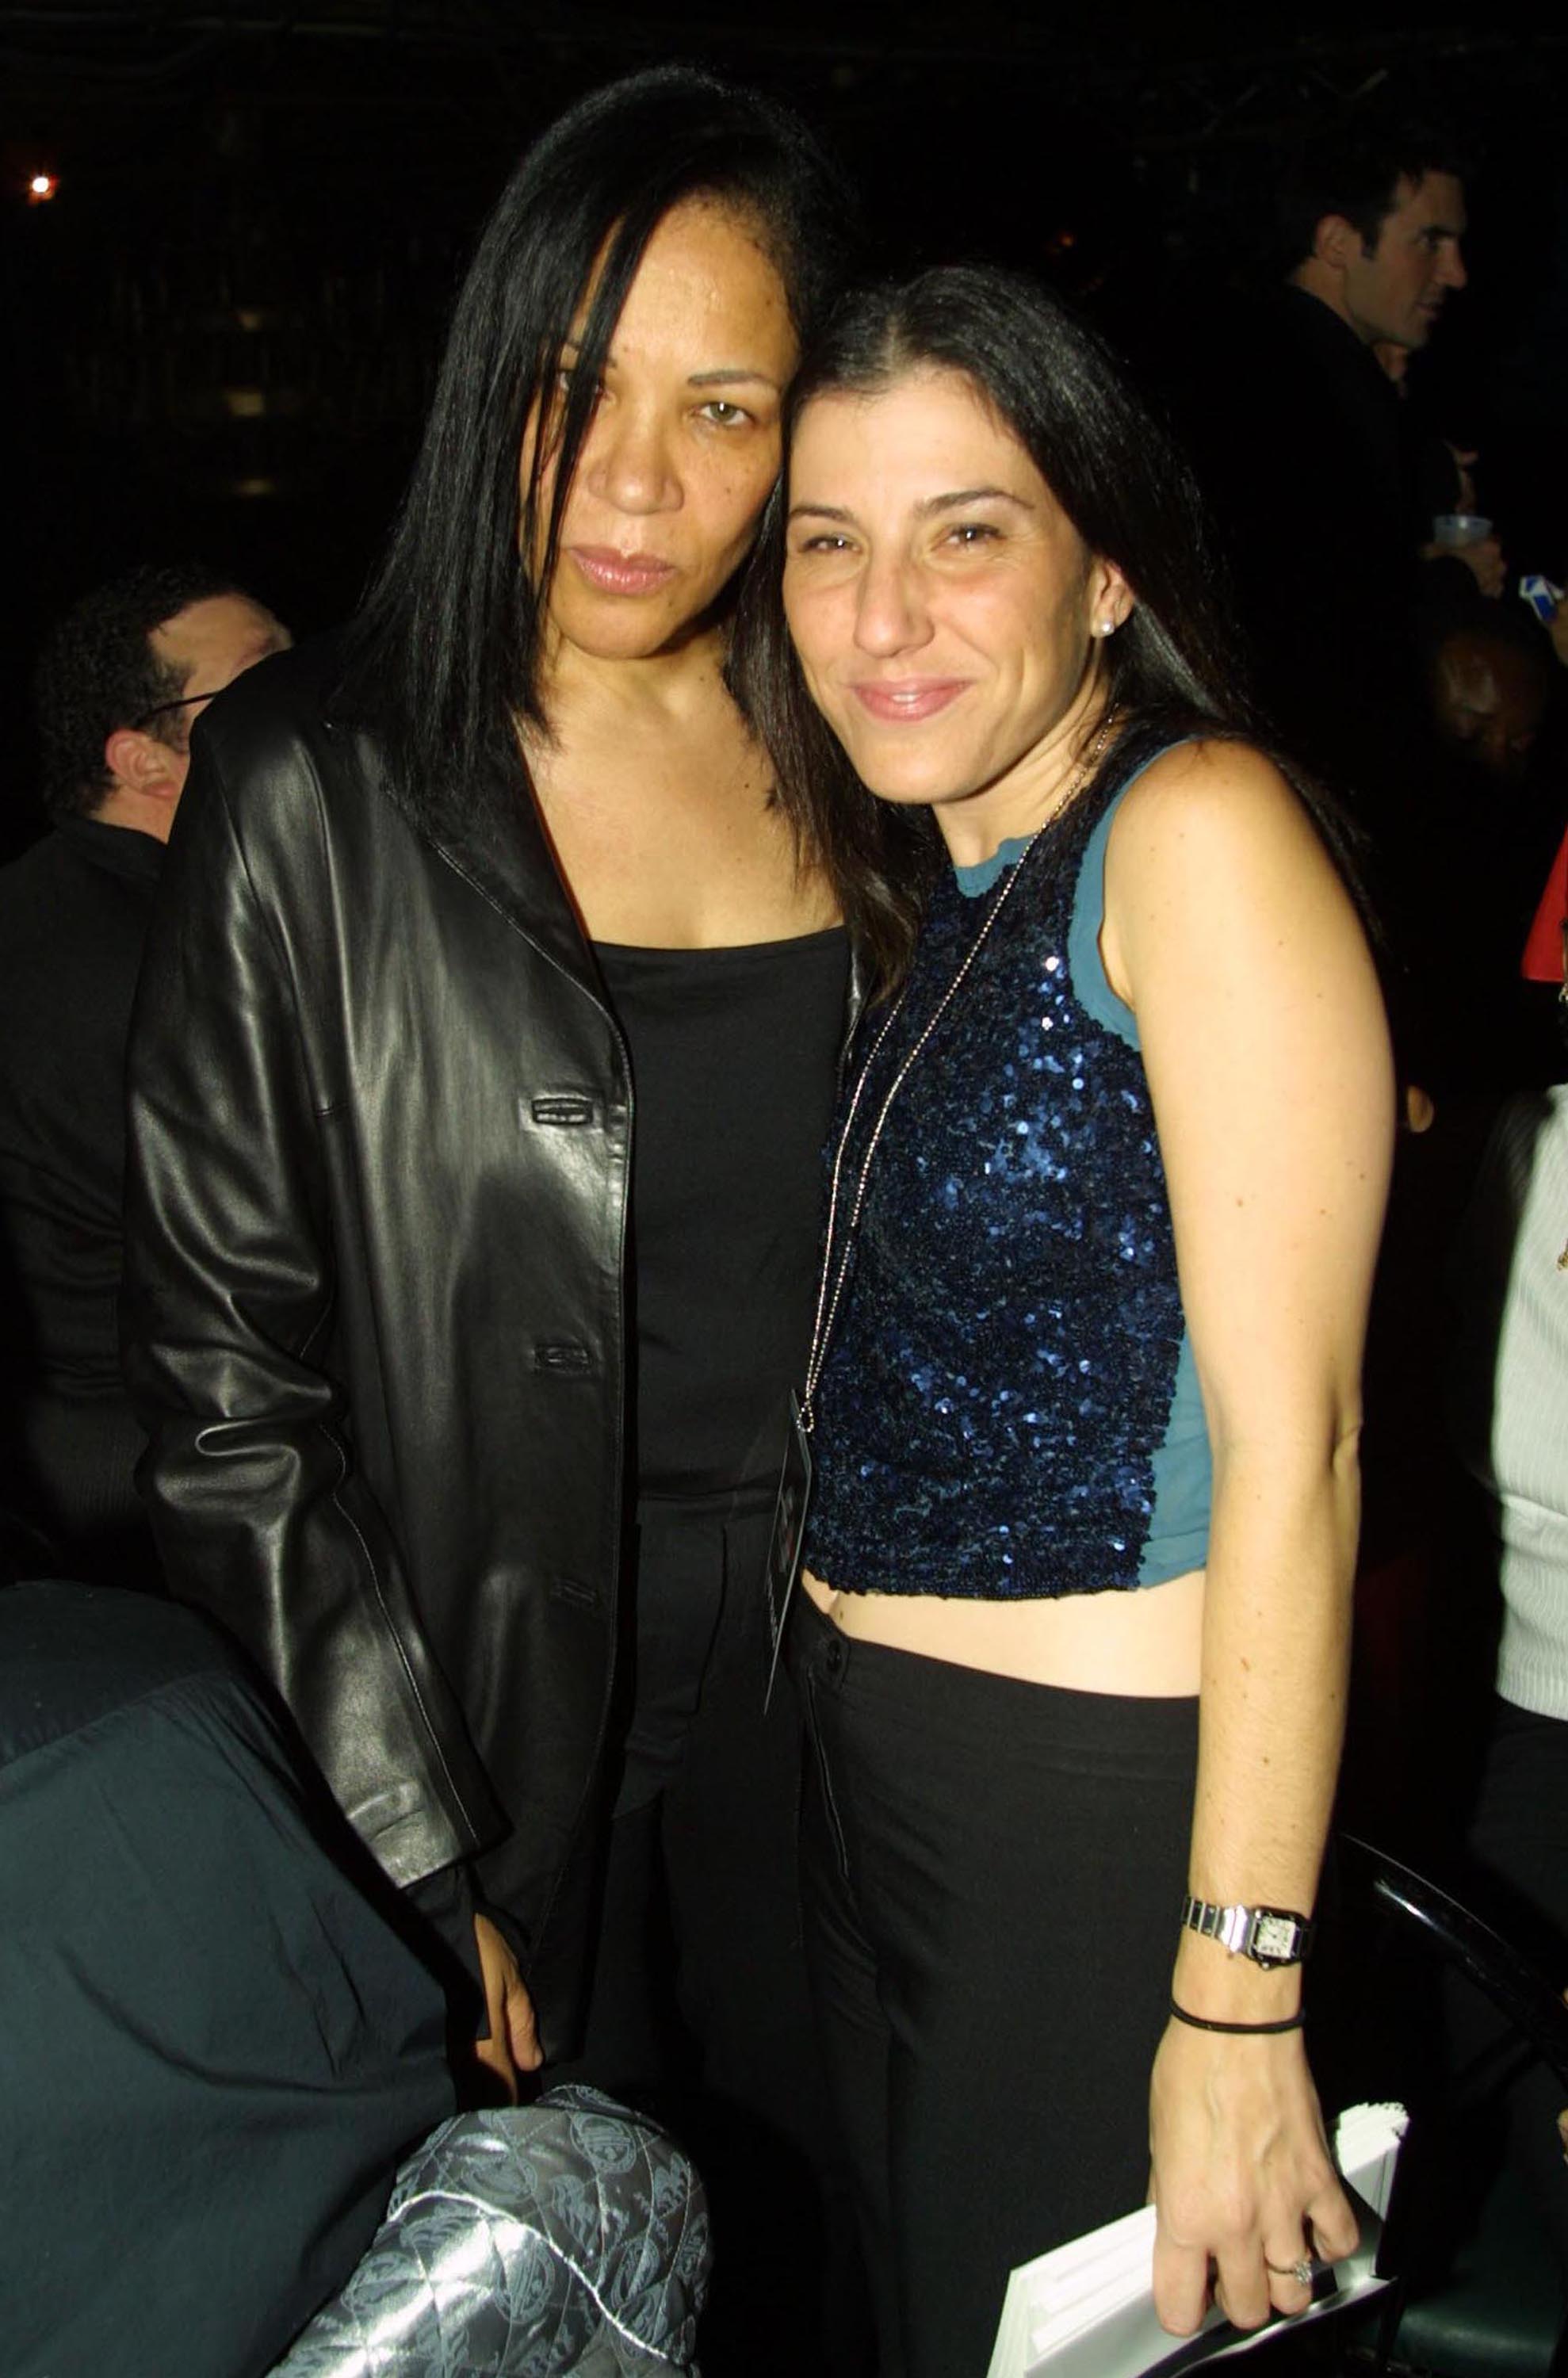 Diane Haughton and Kaye Popofsky, President of Step Up Women's Network in 2002. | Source: Getty Images